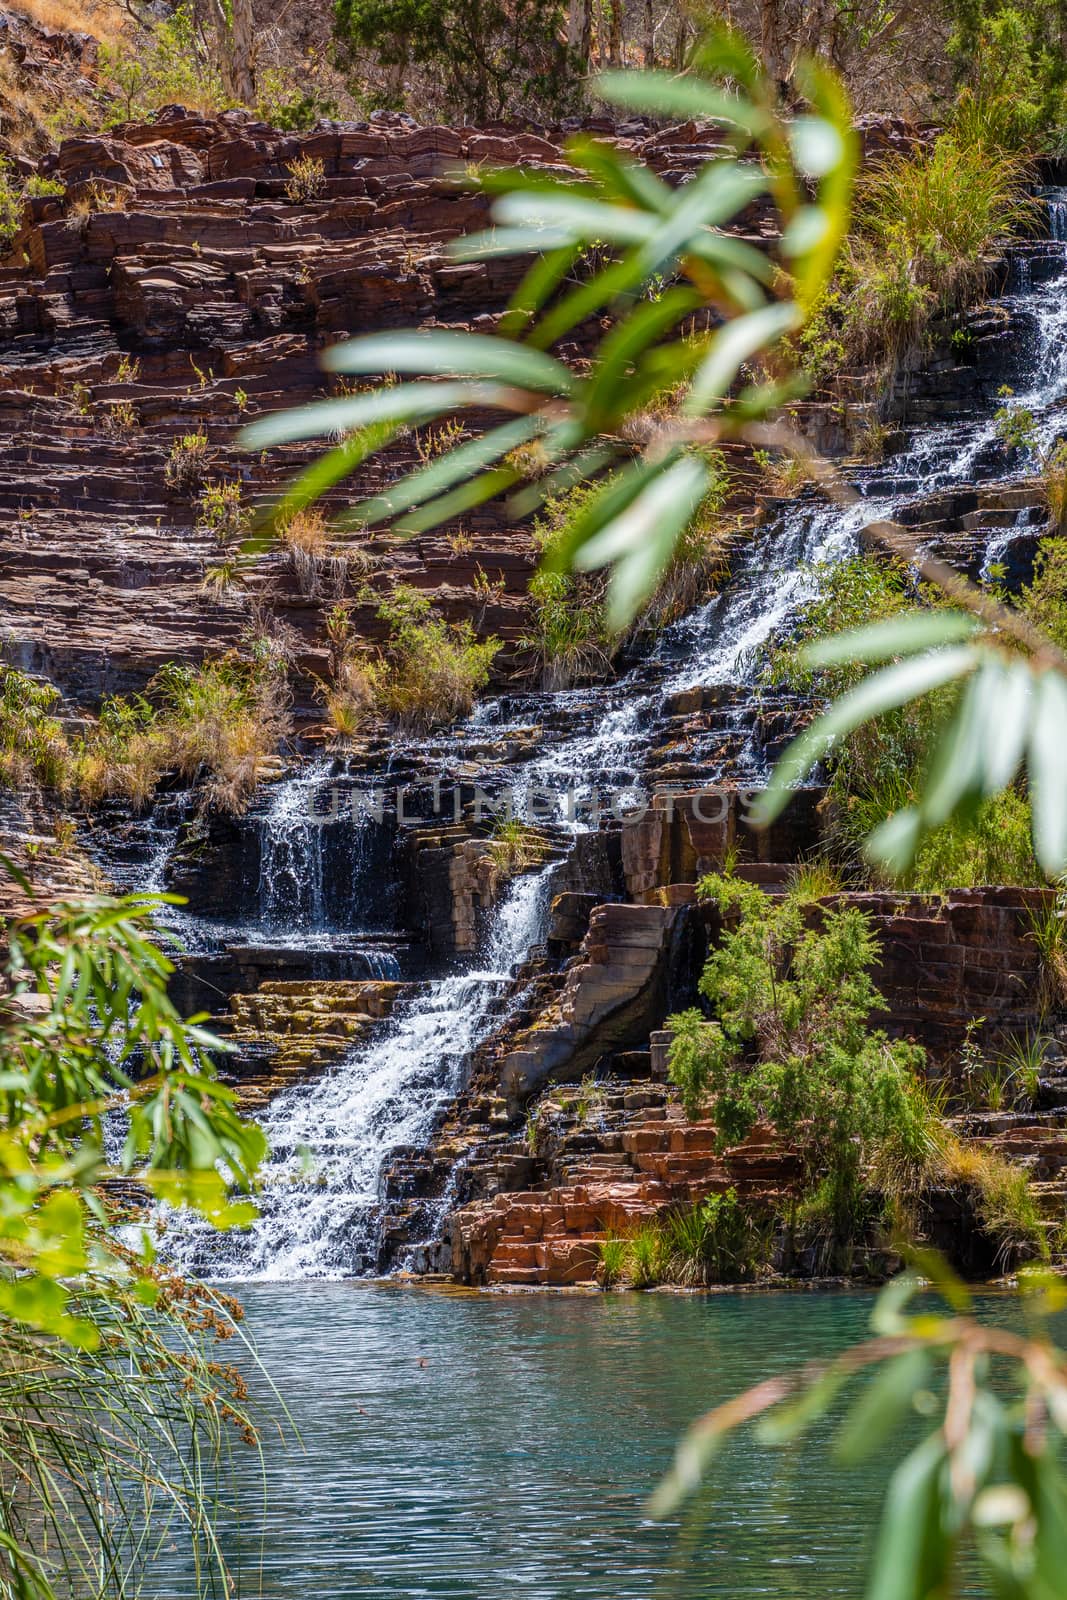 Water rushing over natural steps of sediment rock at Fortescue Falls at the bottom of Dales Gorge Karijini National Park Australia